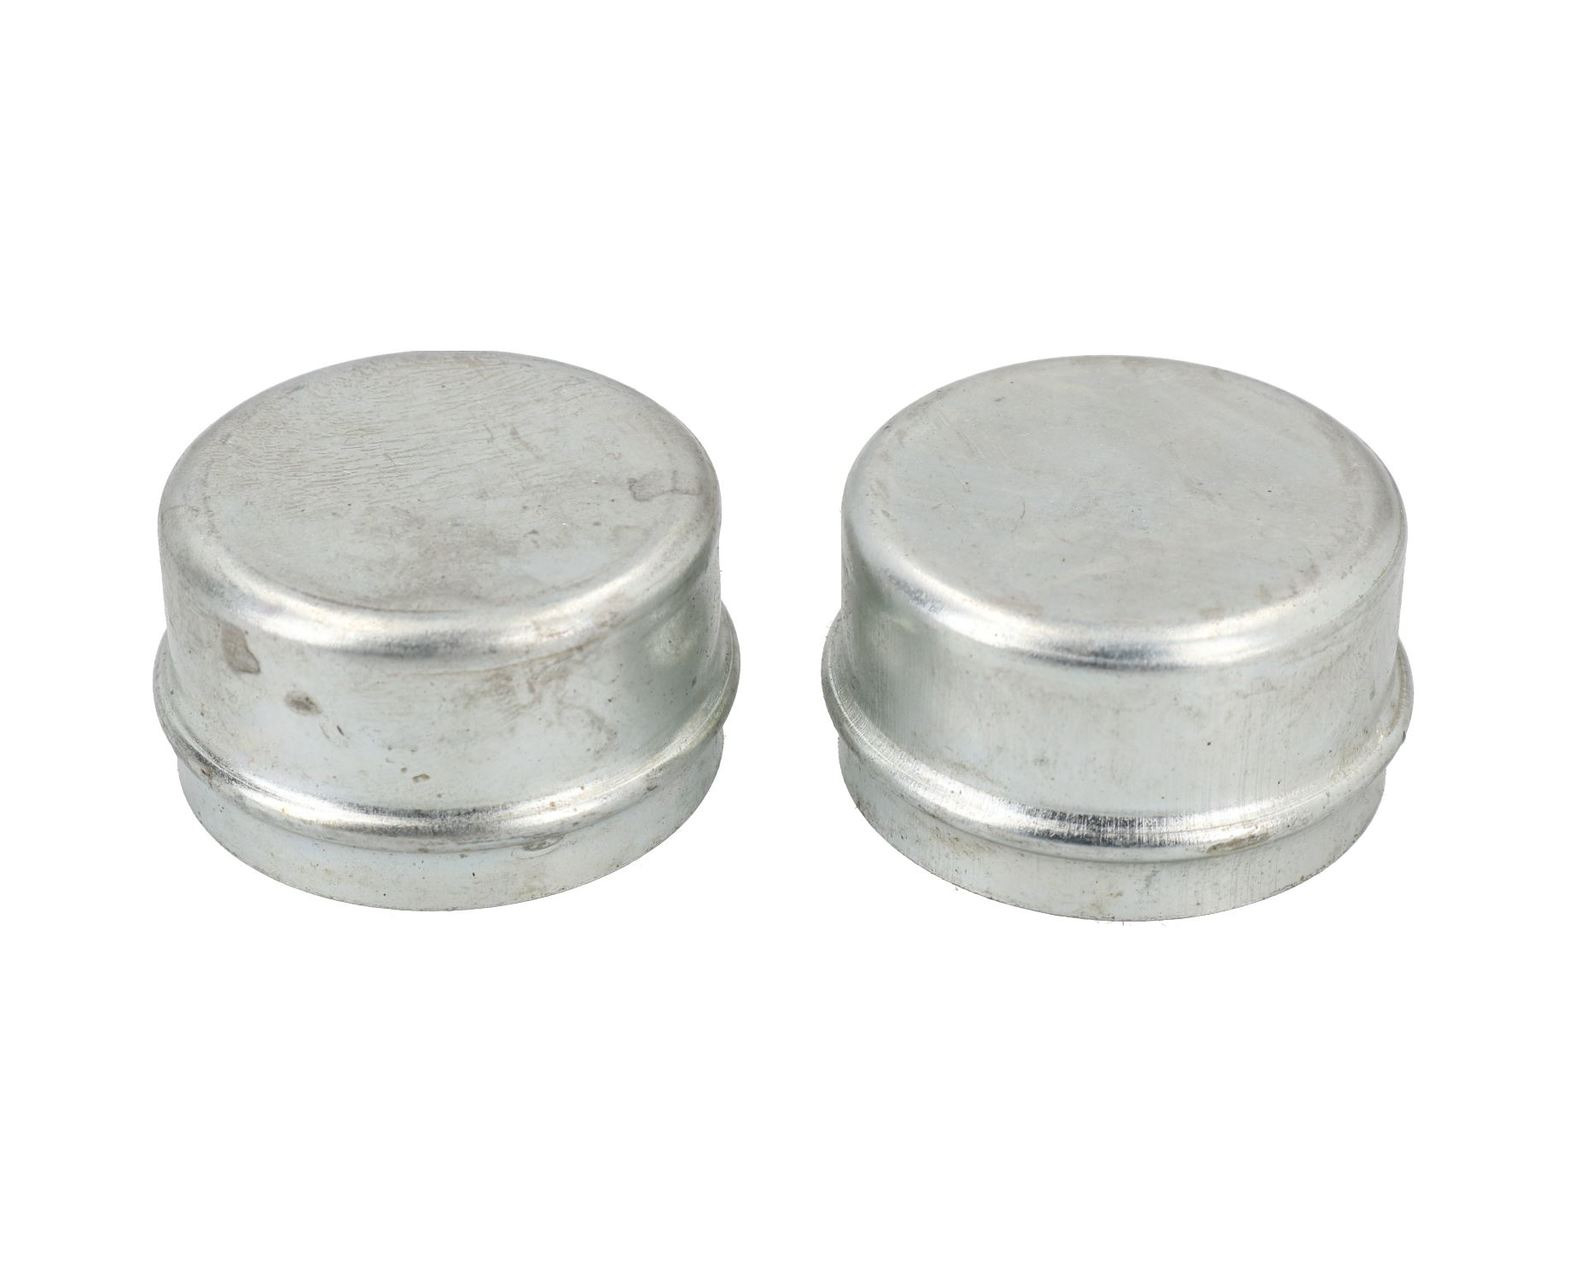 AB Tools Replacement 55.5mm Dust Hub Cap Grease Cover for Alko Trailer Drums 2 Pack 